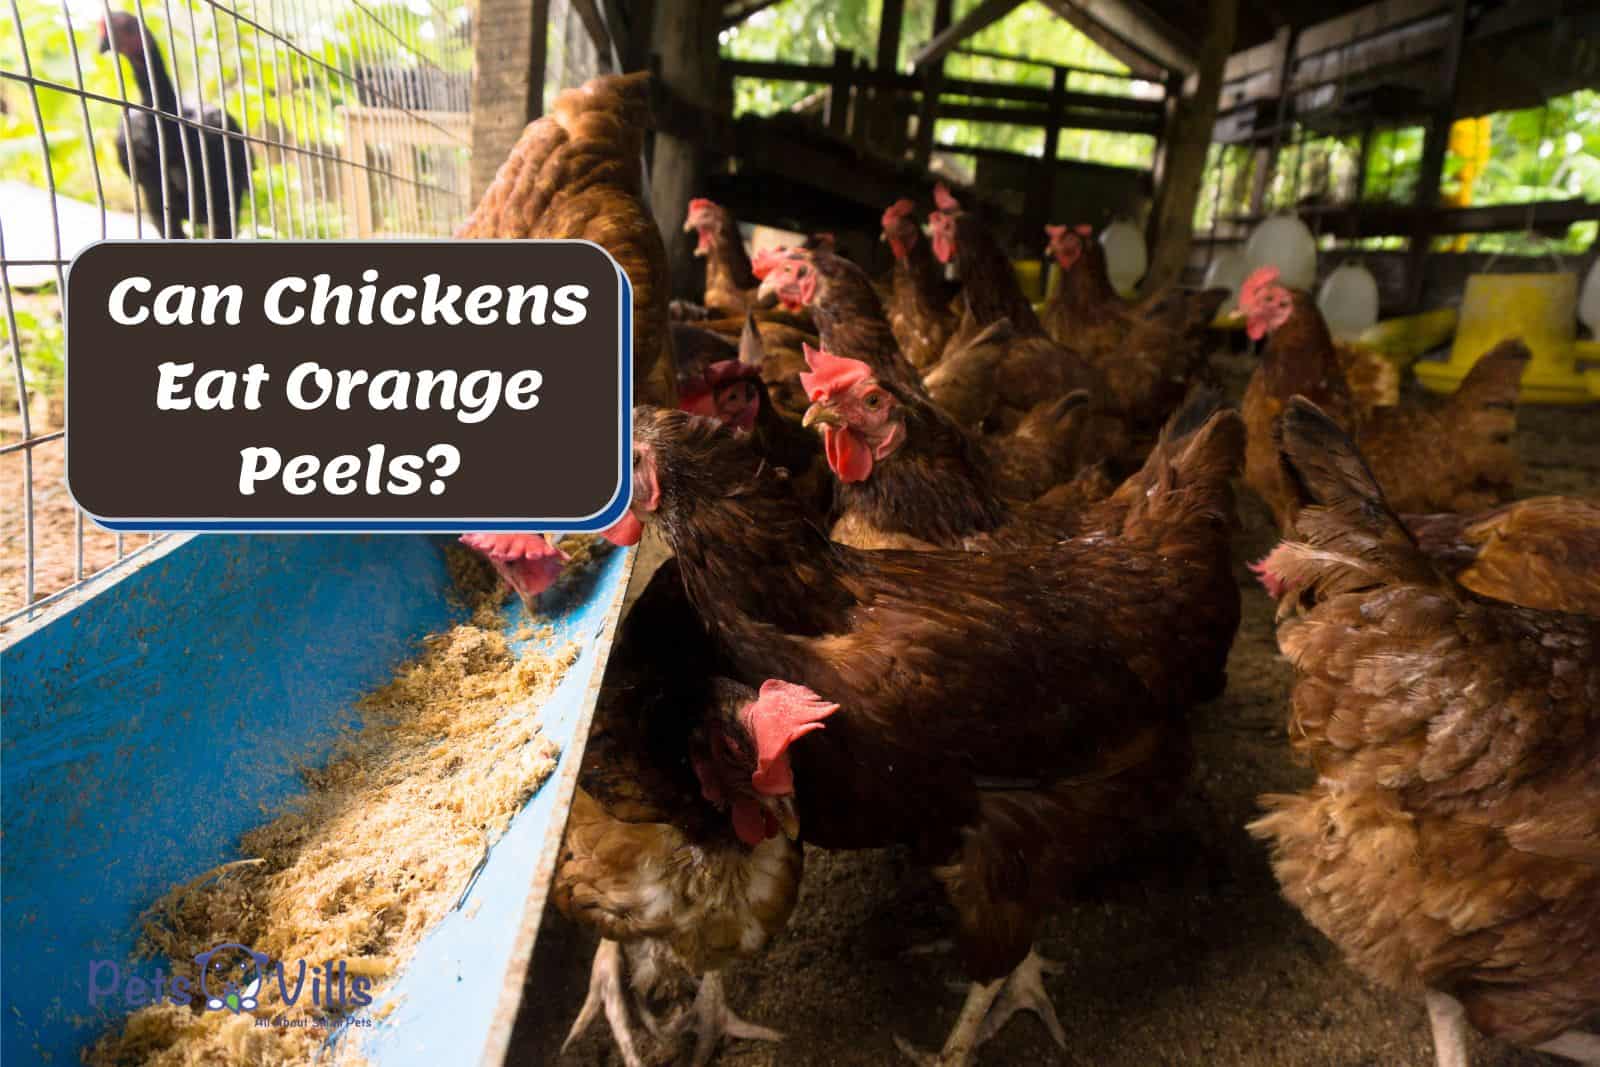 laying chickens inside a coop but Can Chickens Eat Orange Peels?